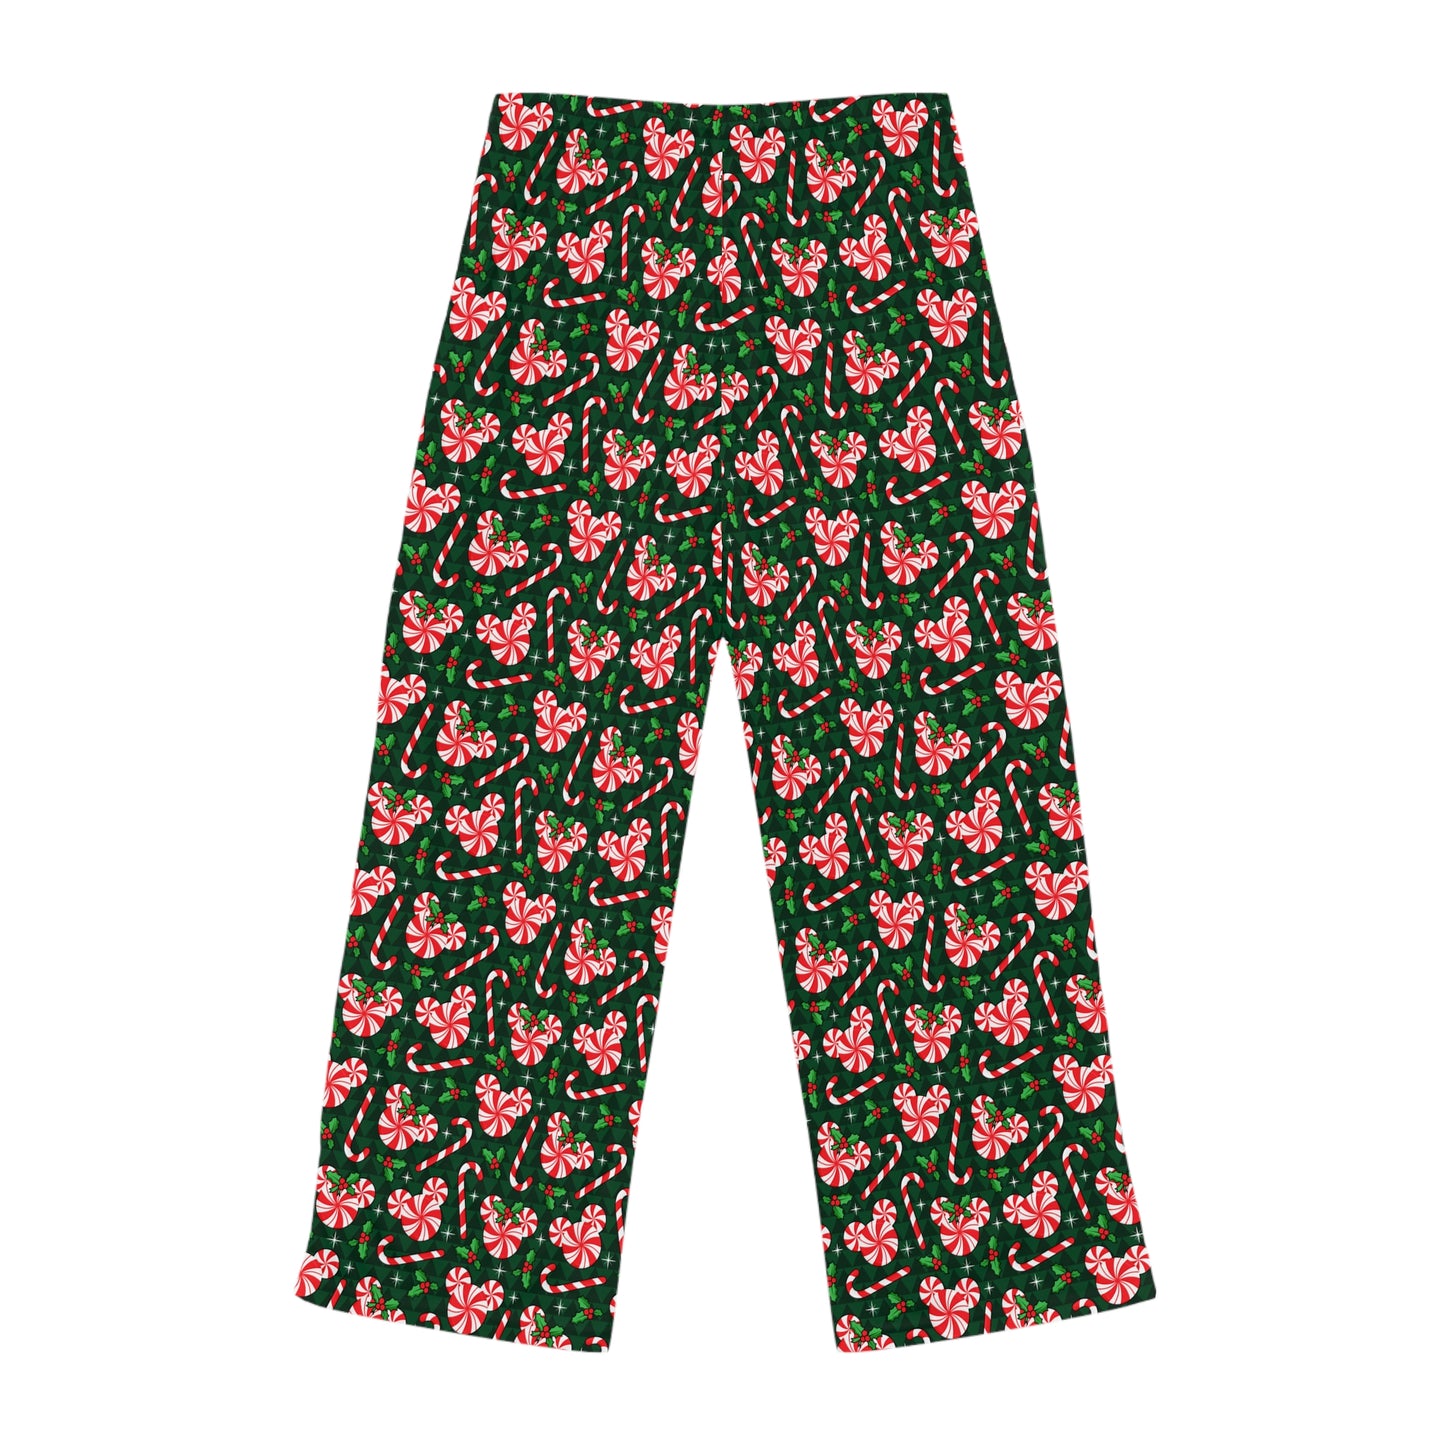 Peppermint Candy Women's Pajama Pants